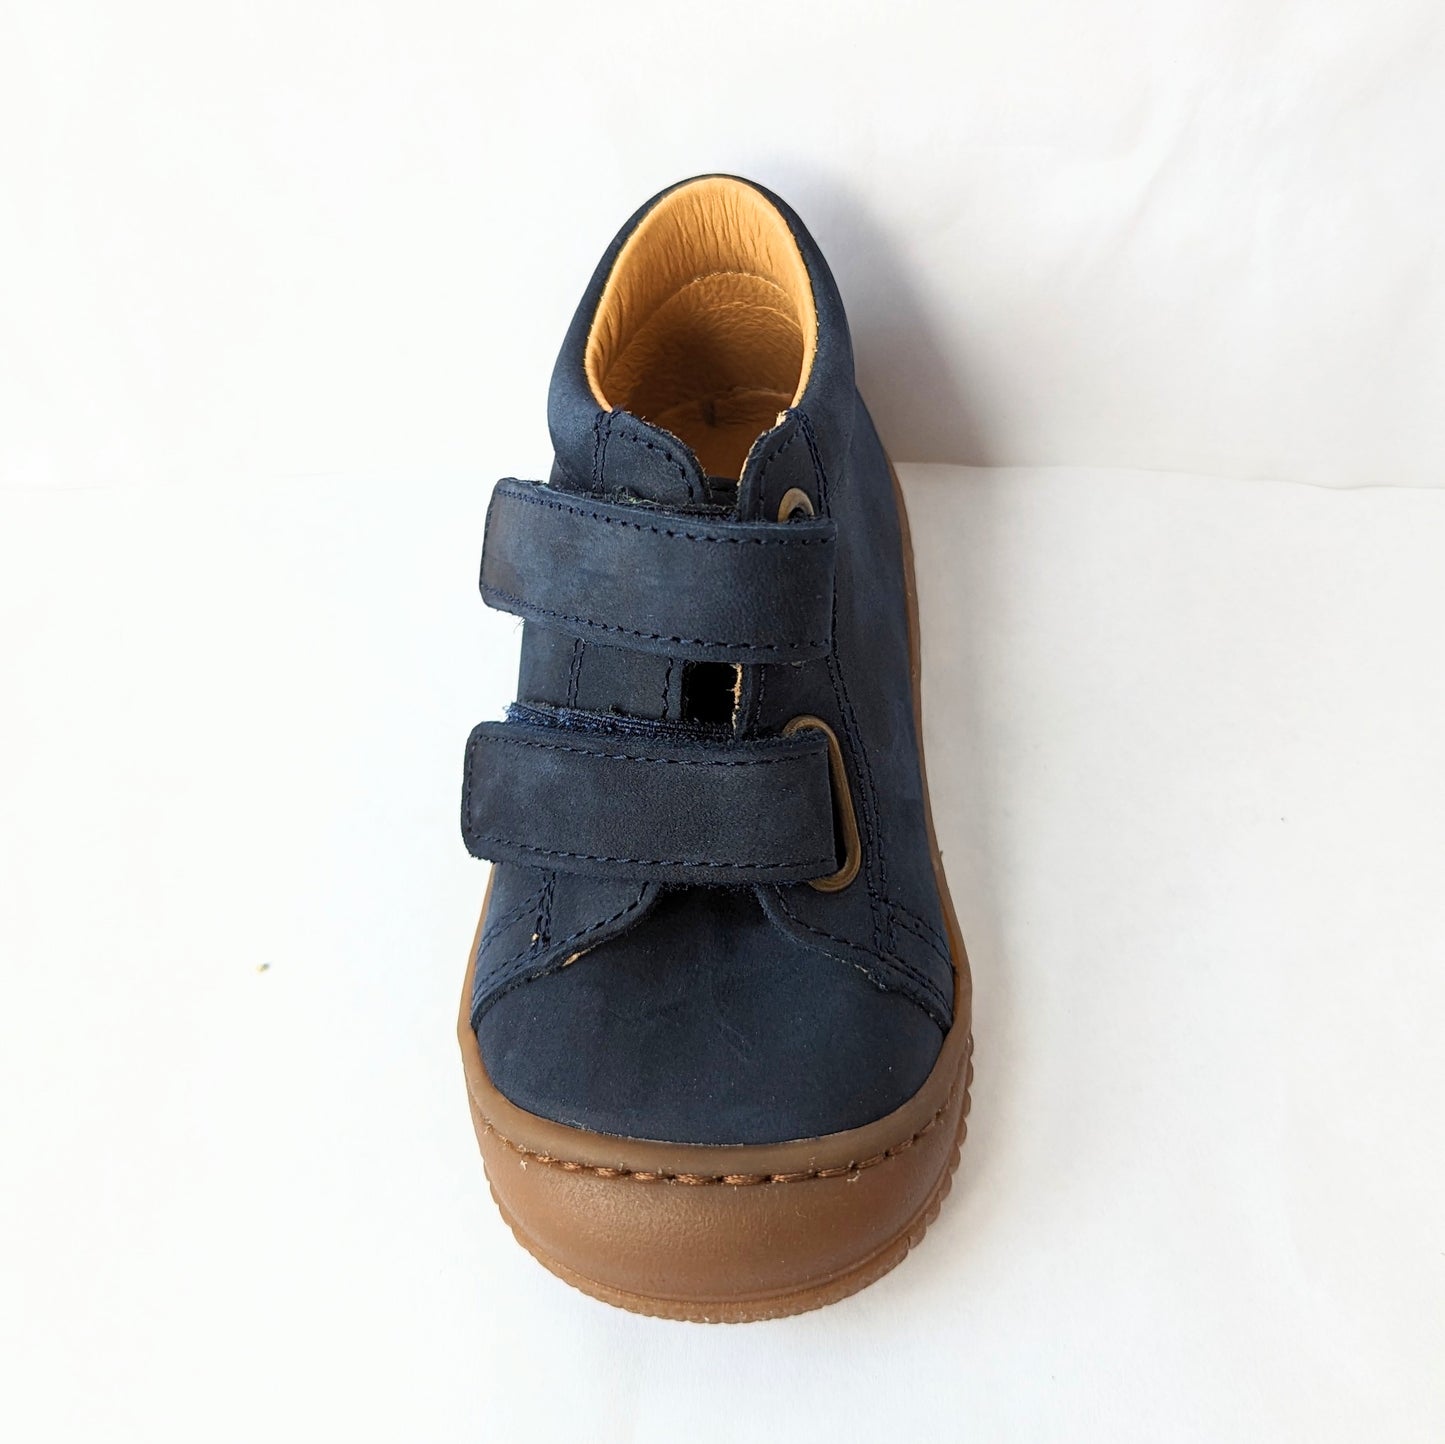 A boys ankle boot by Bopy, style Jameco, in navy nubuck with toe bumper and double velcro fastening. Right side view.Front view.